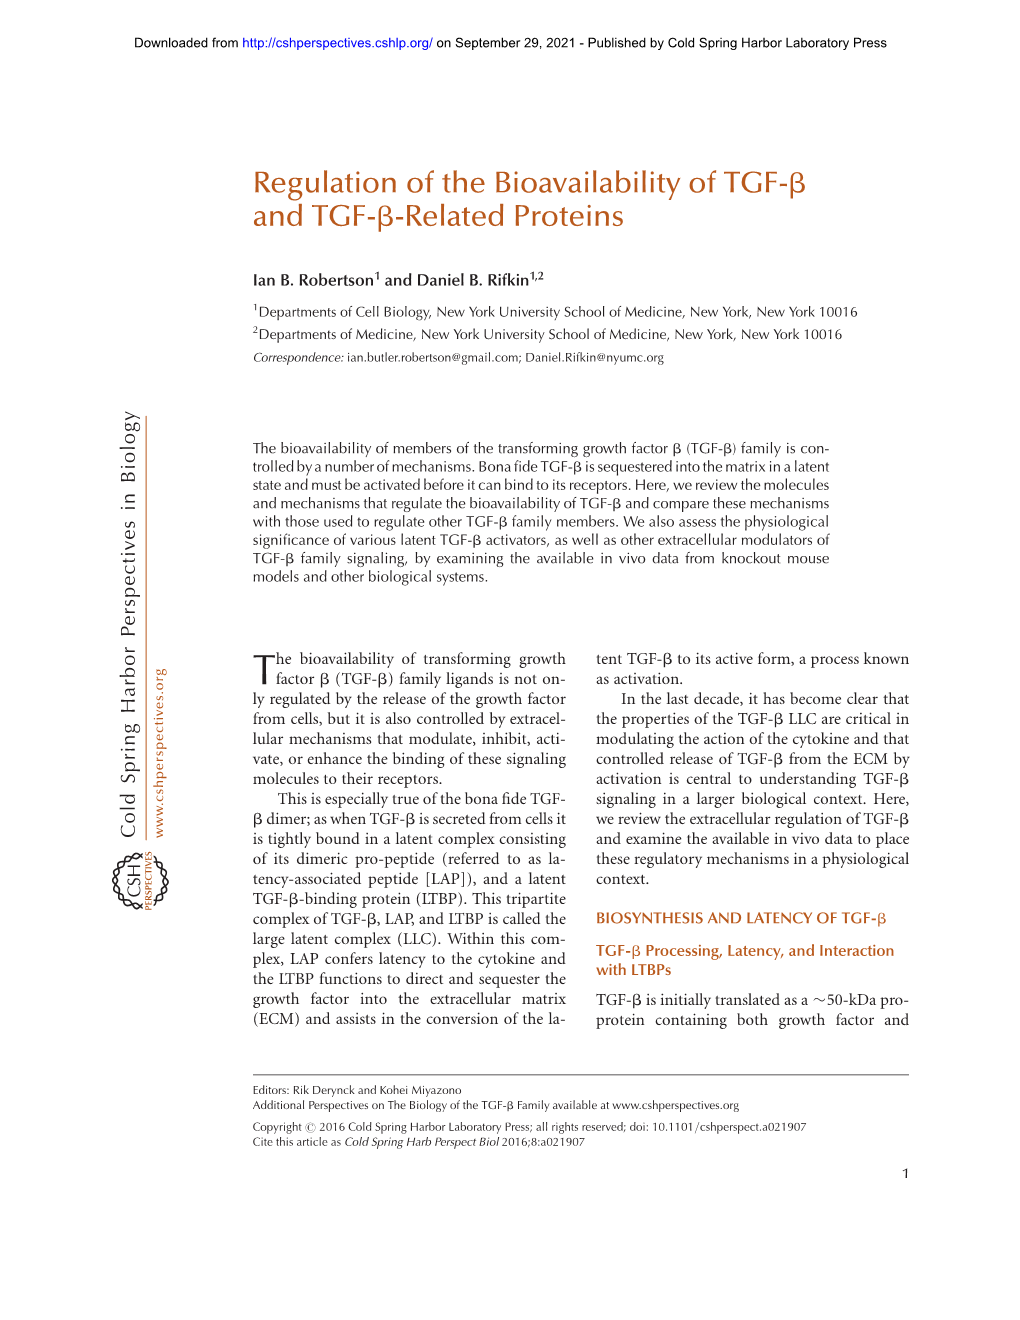 Regulation of the Bioavailability of TGF-Β and TGF-Β-Related Proteins